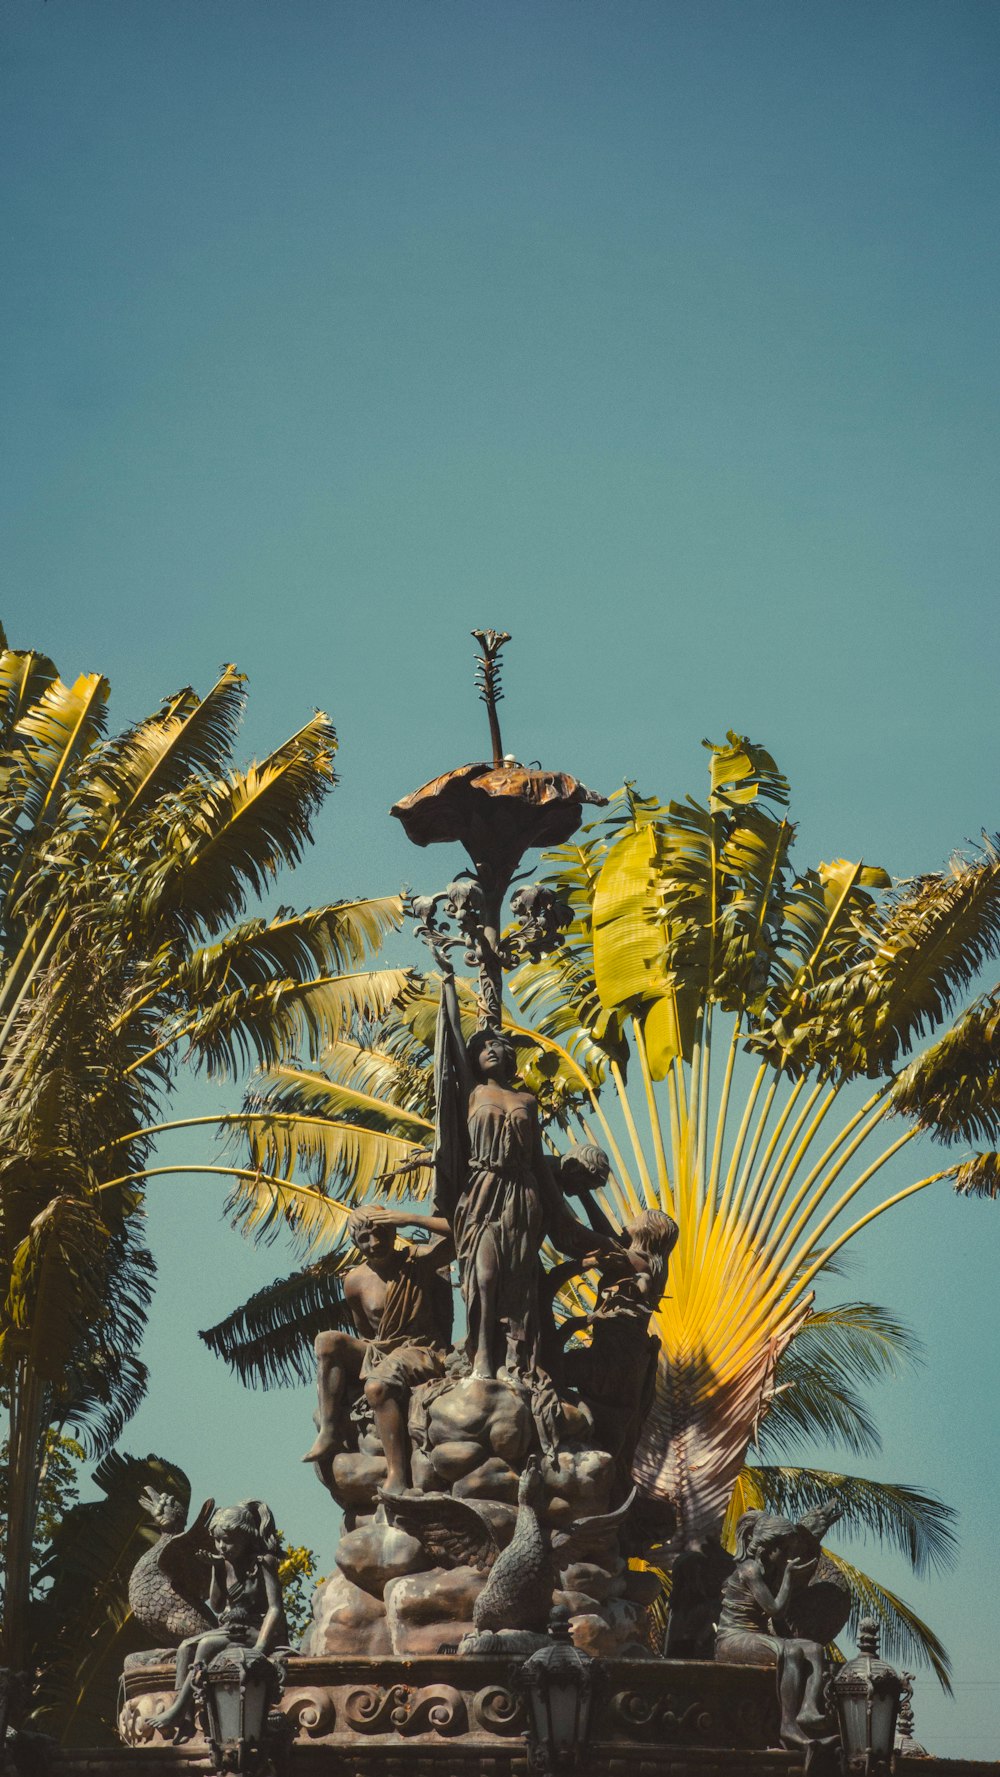 a statue with a cross on top of it surrounded by palm trees